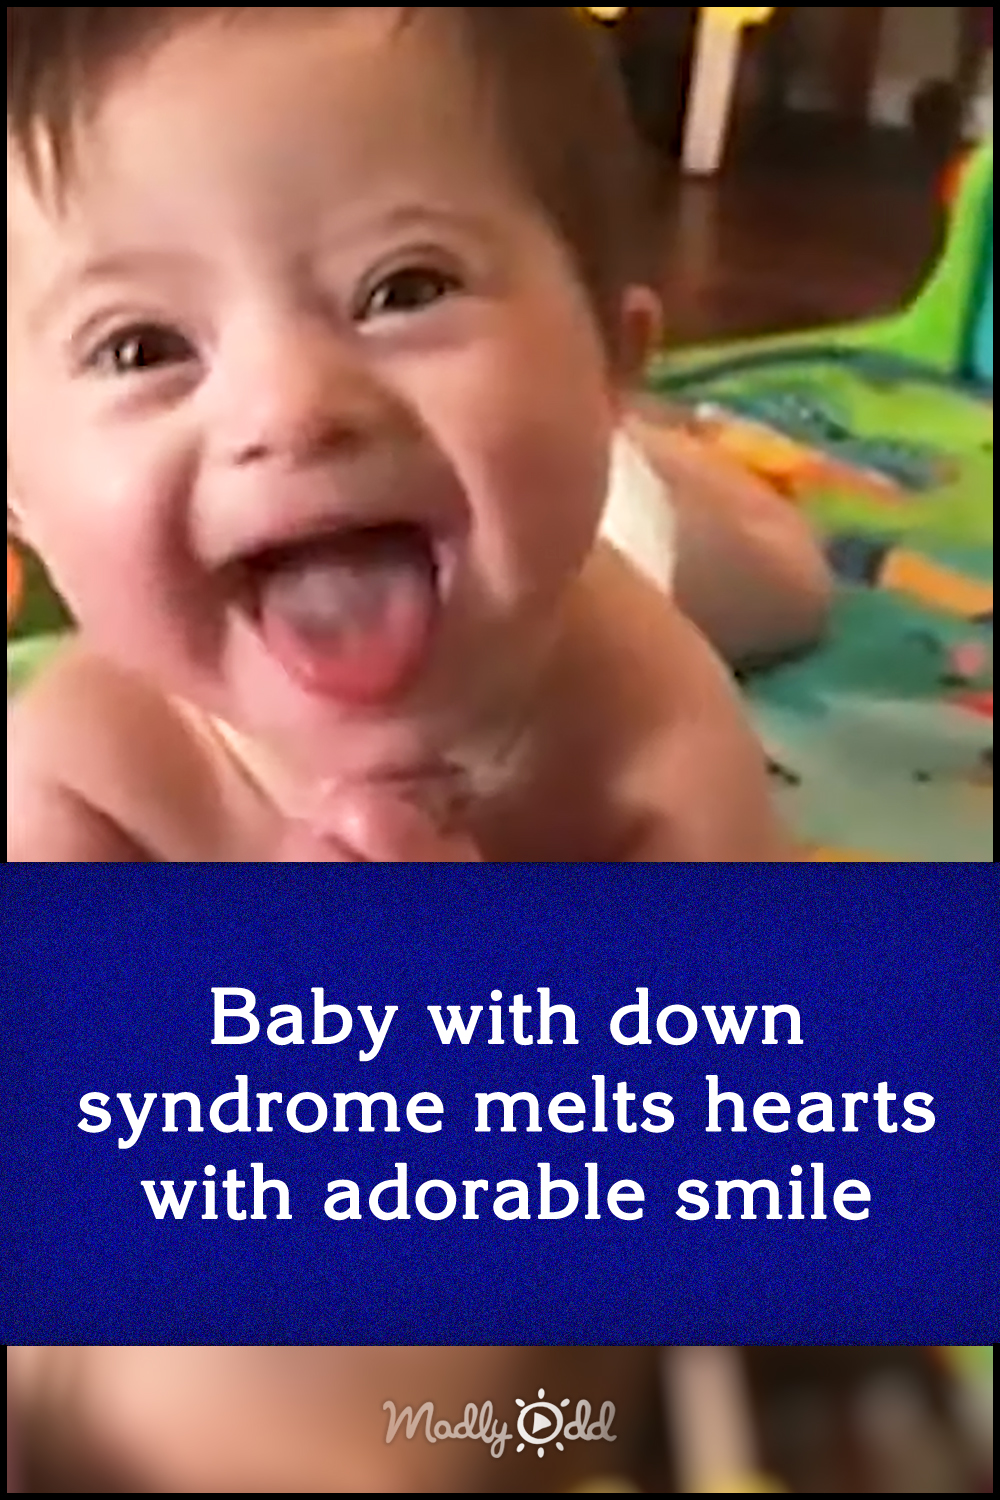 Baby with down syndrome melts hearts with adorable smile